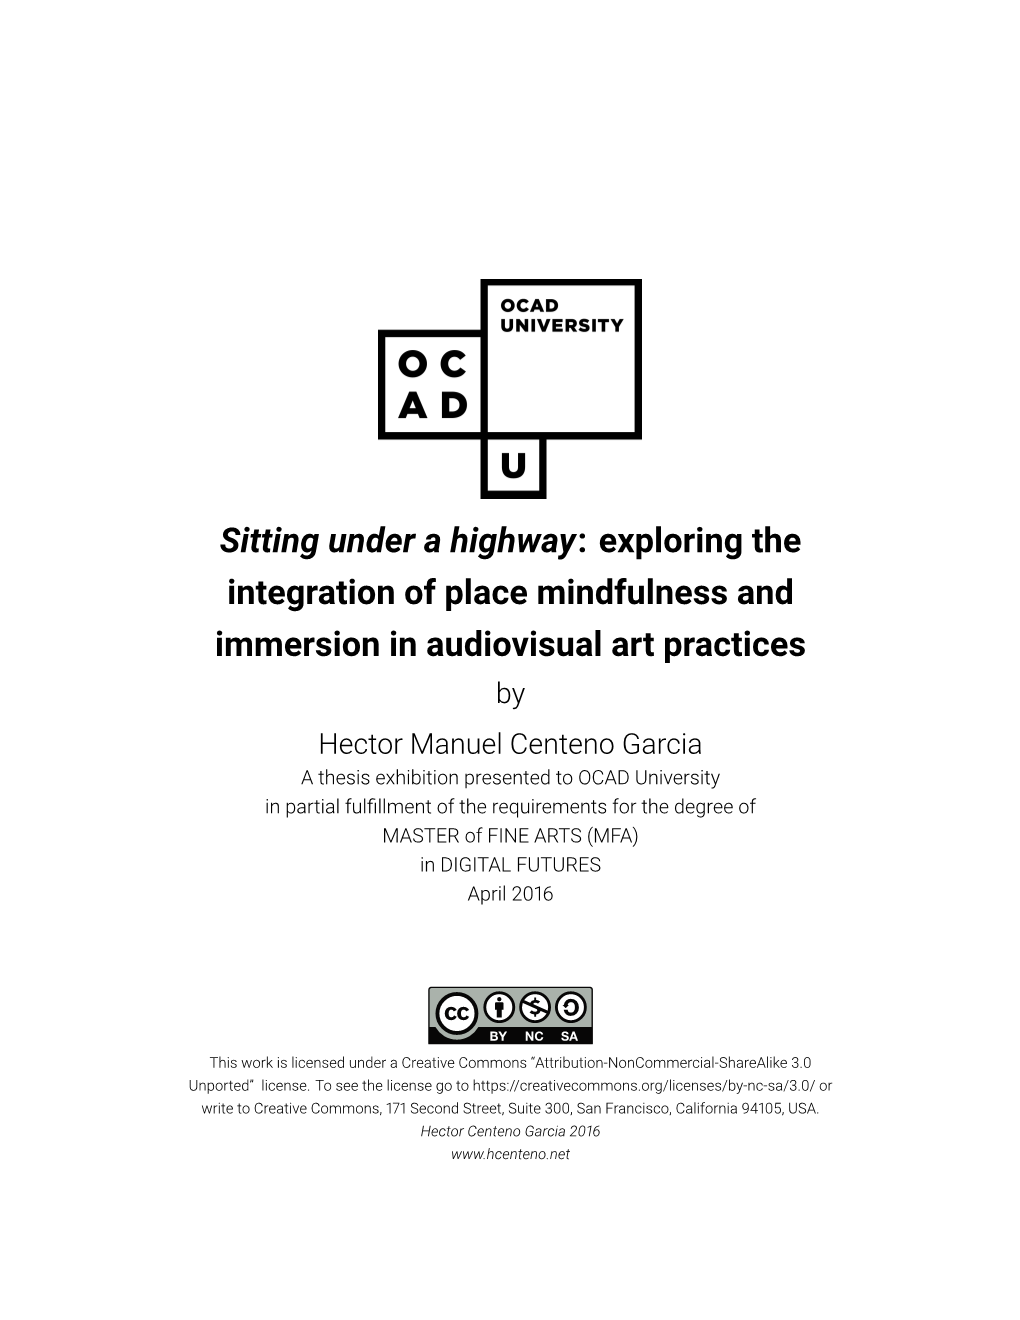 Exploring the Integration of Place Mindfulness and Immersion in Audiovisual Art Practices